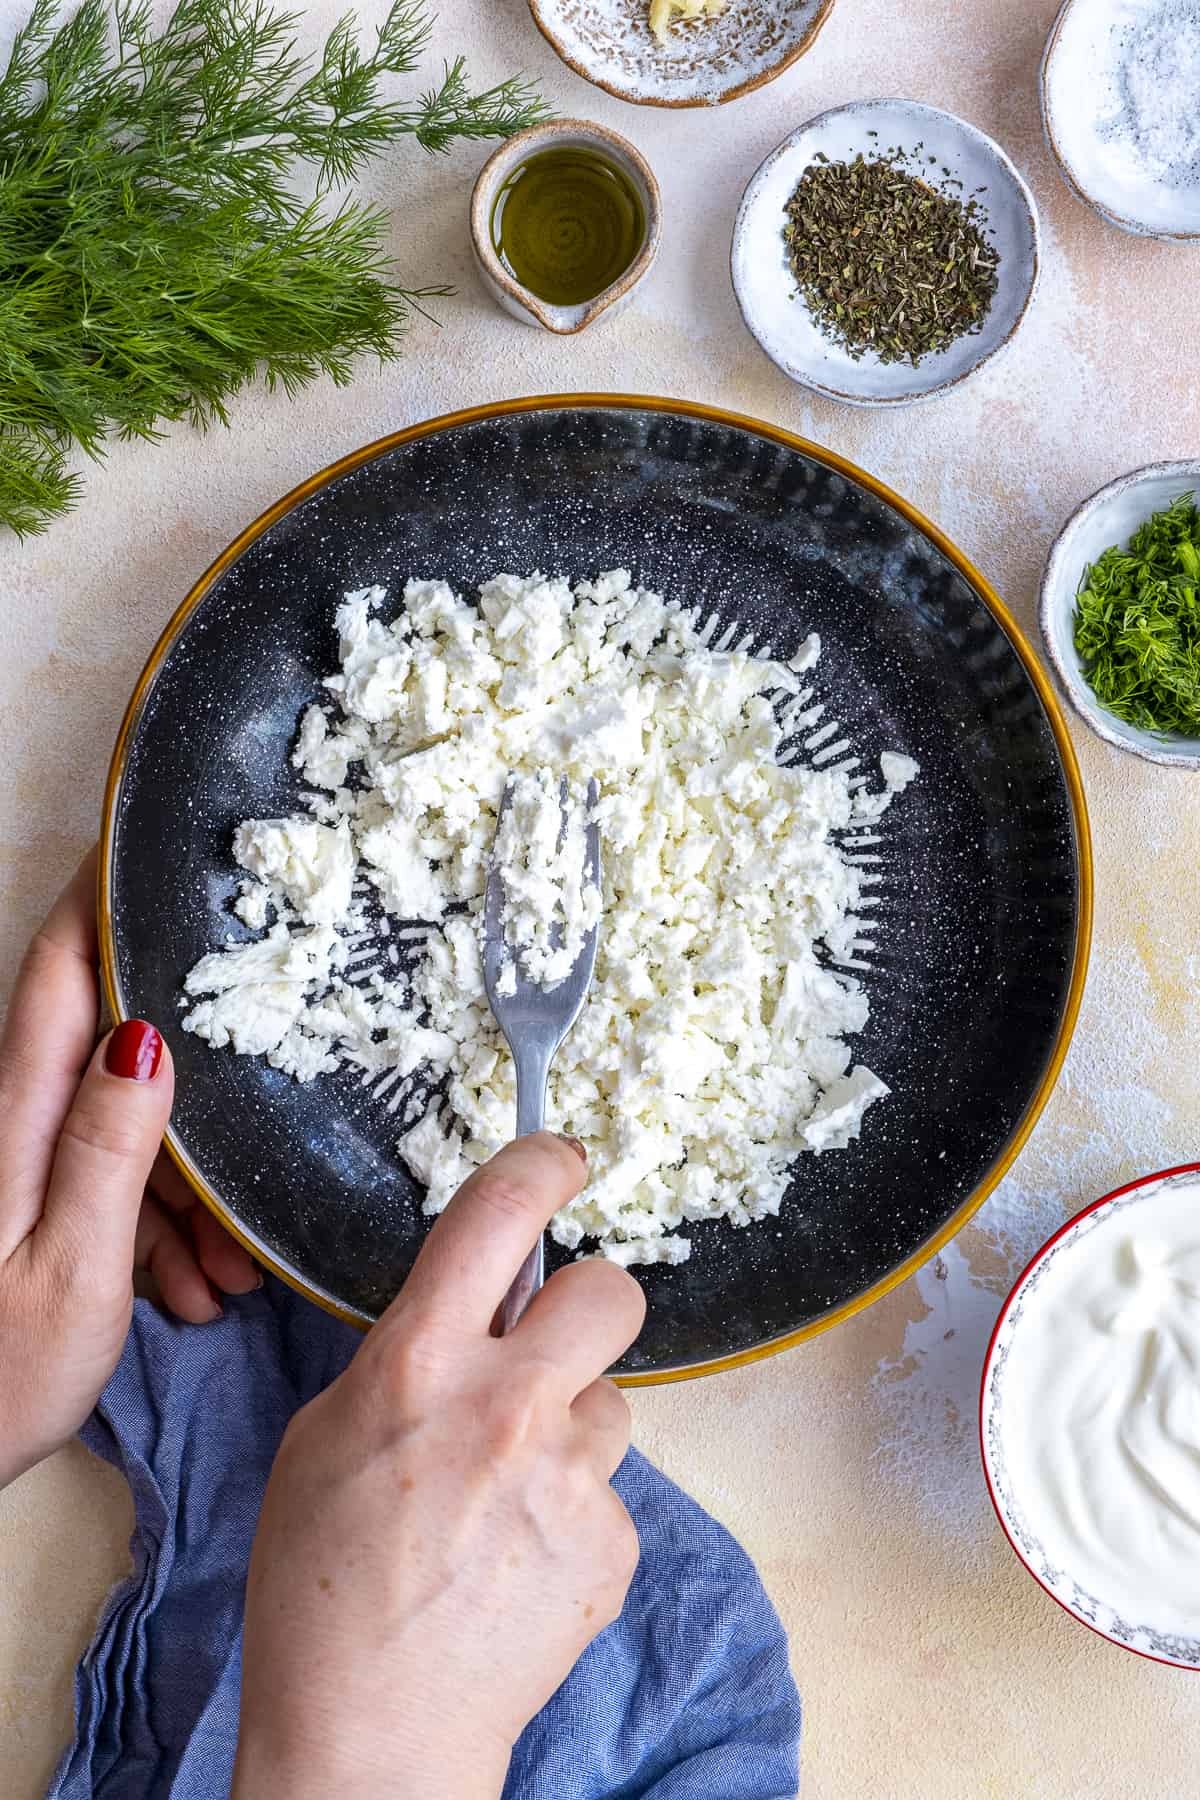 Woman hands mashing feta cheese with a fork in a black bowl.